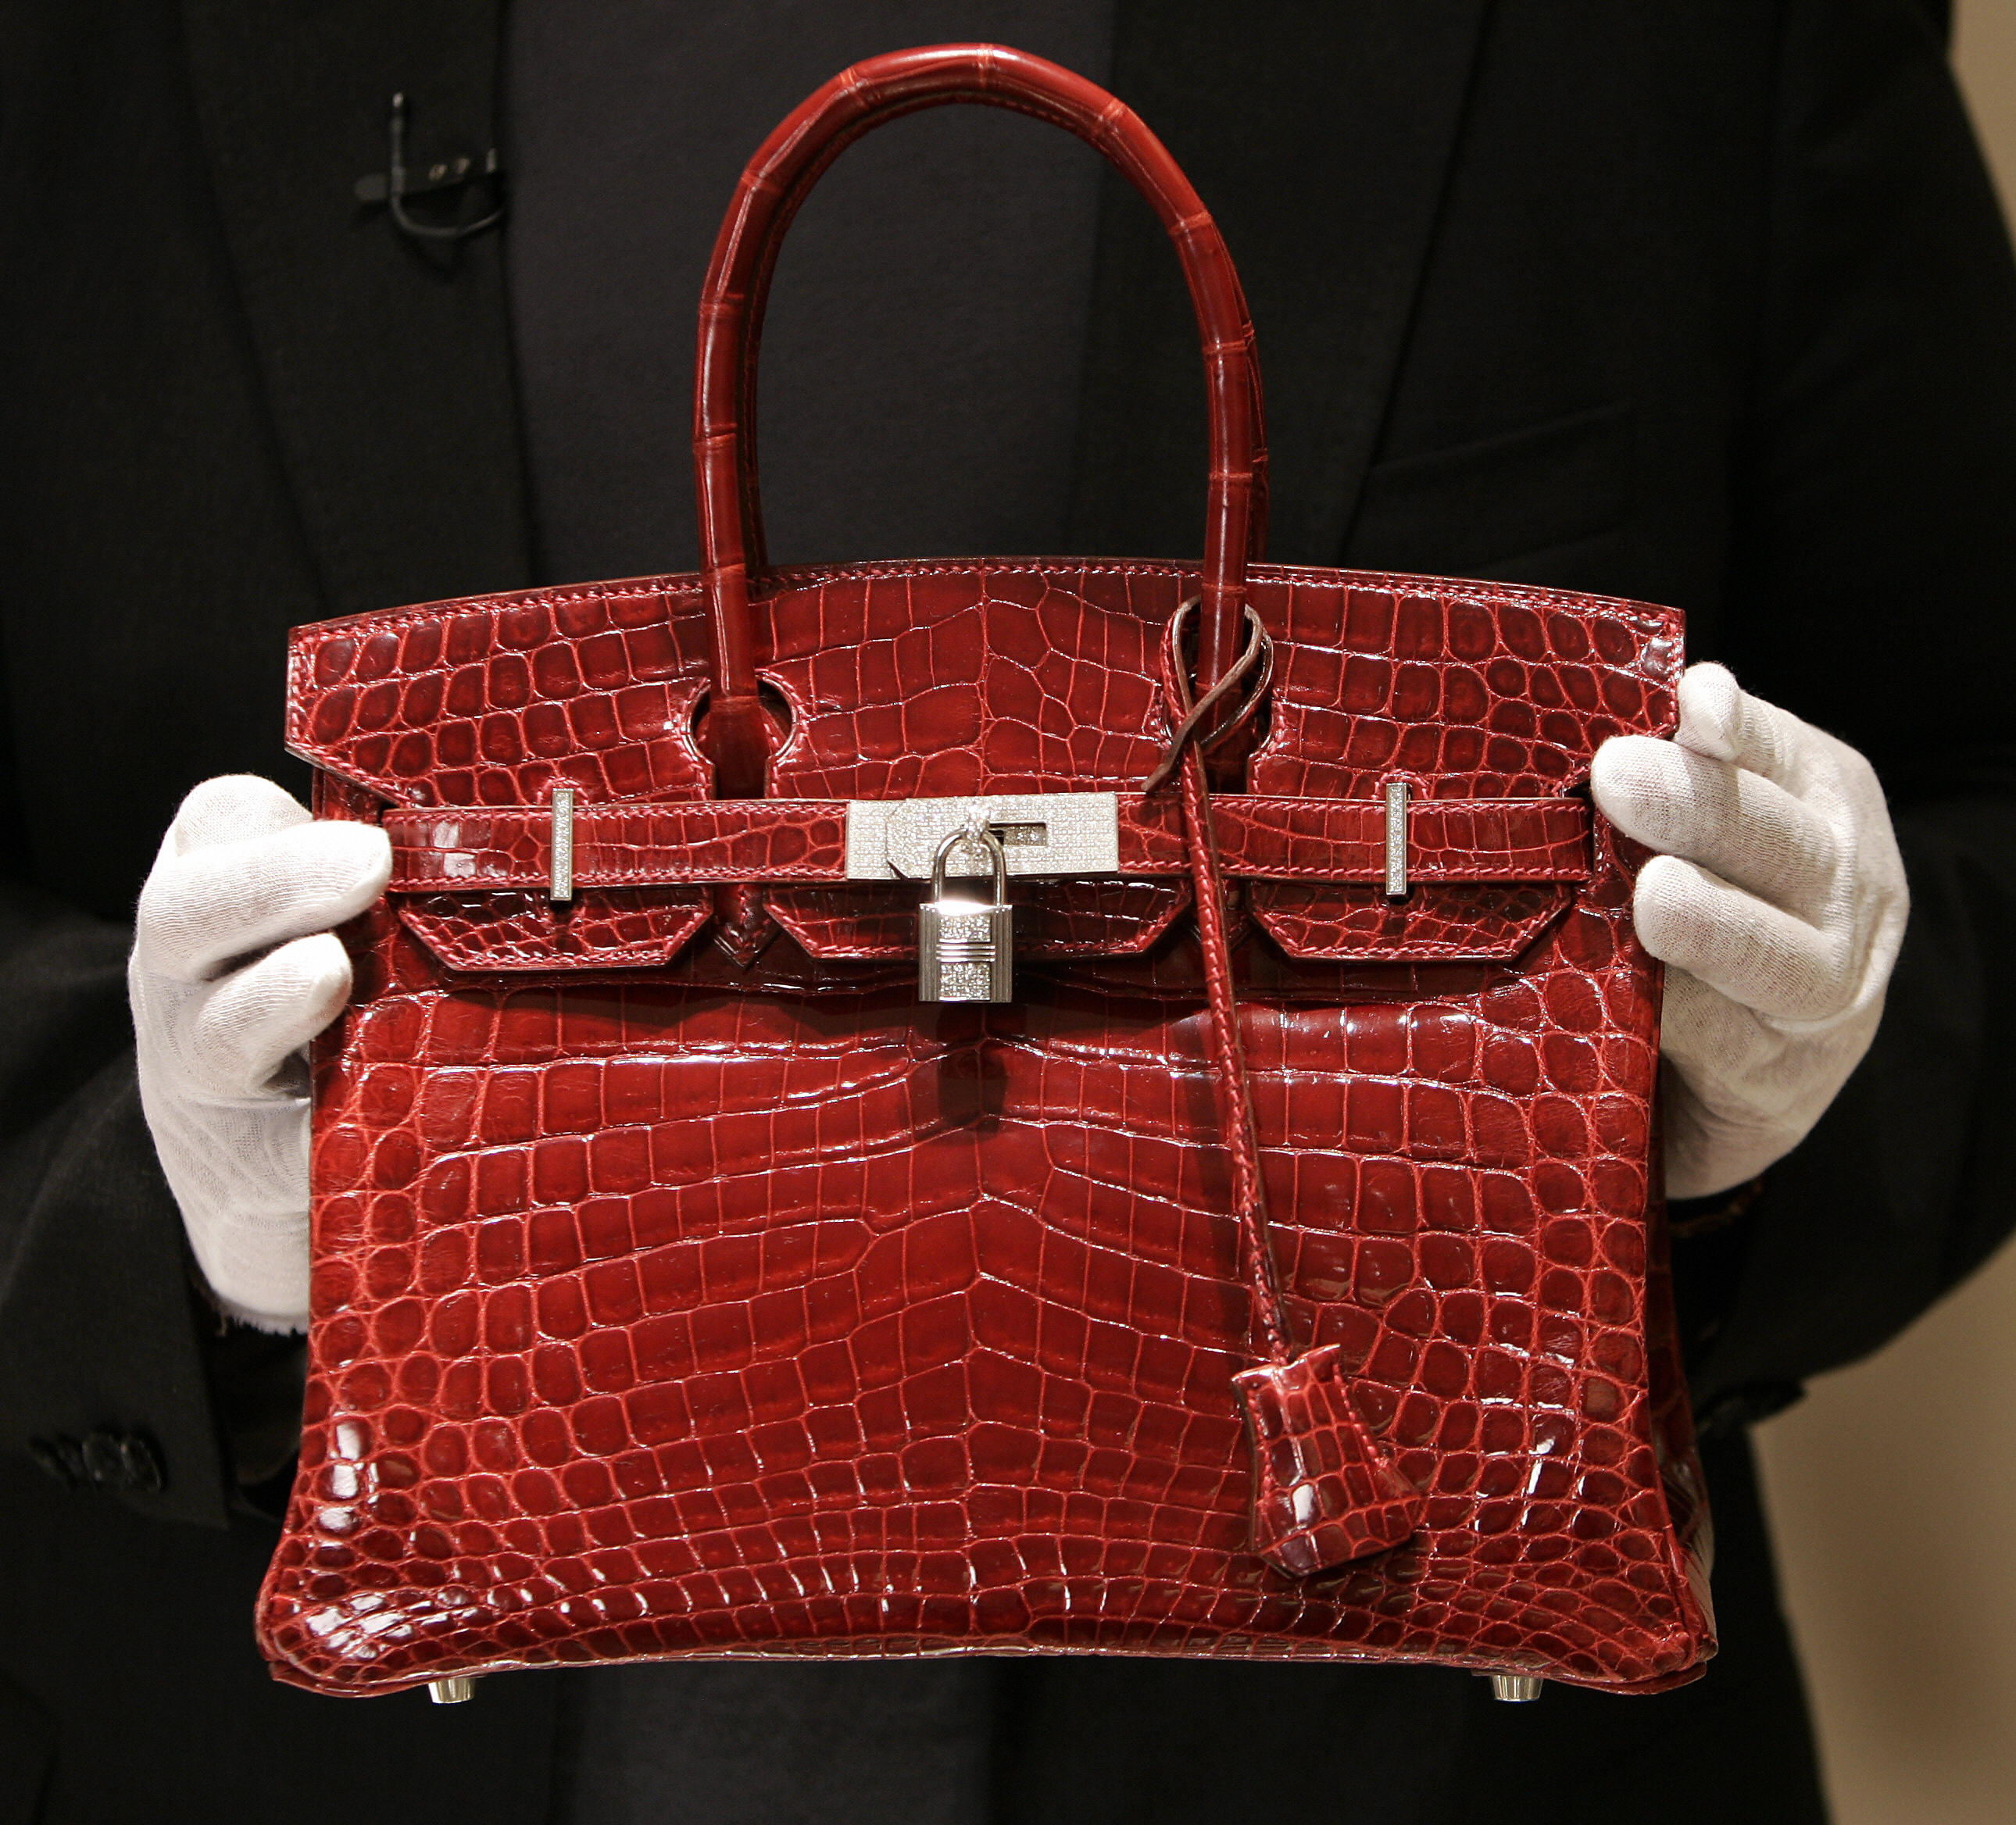 A employee holds a $129,000 crocodile Hermes Birkin Bag during a private opening for the new Hermes store on Wall Street in New York 21 June 2007.